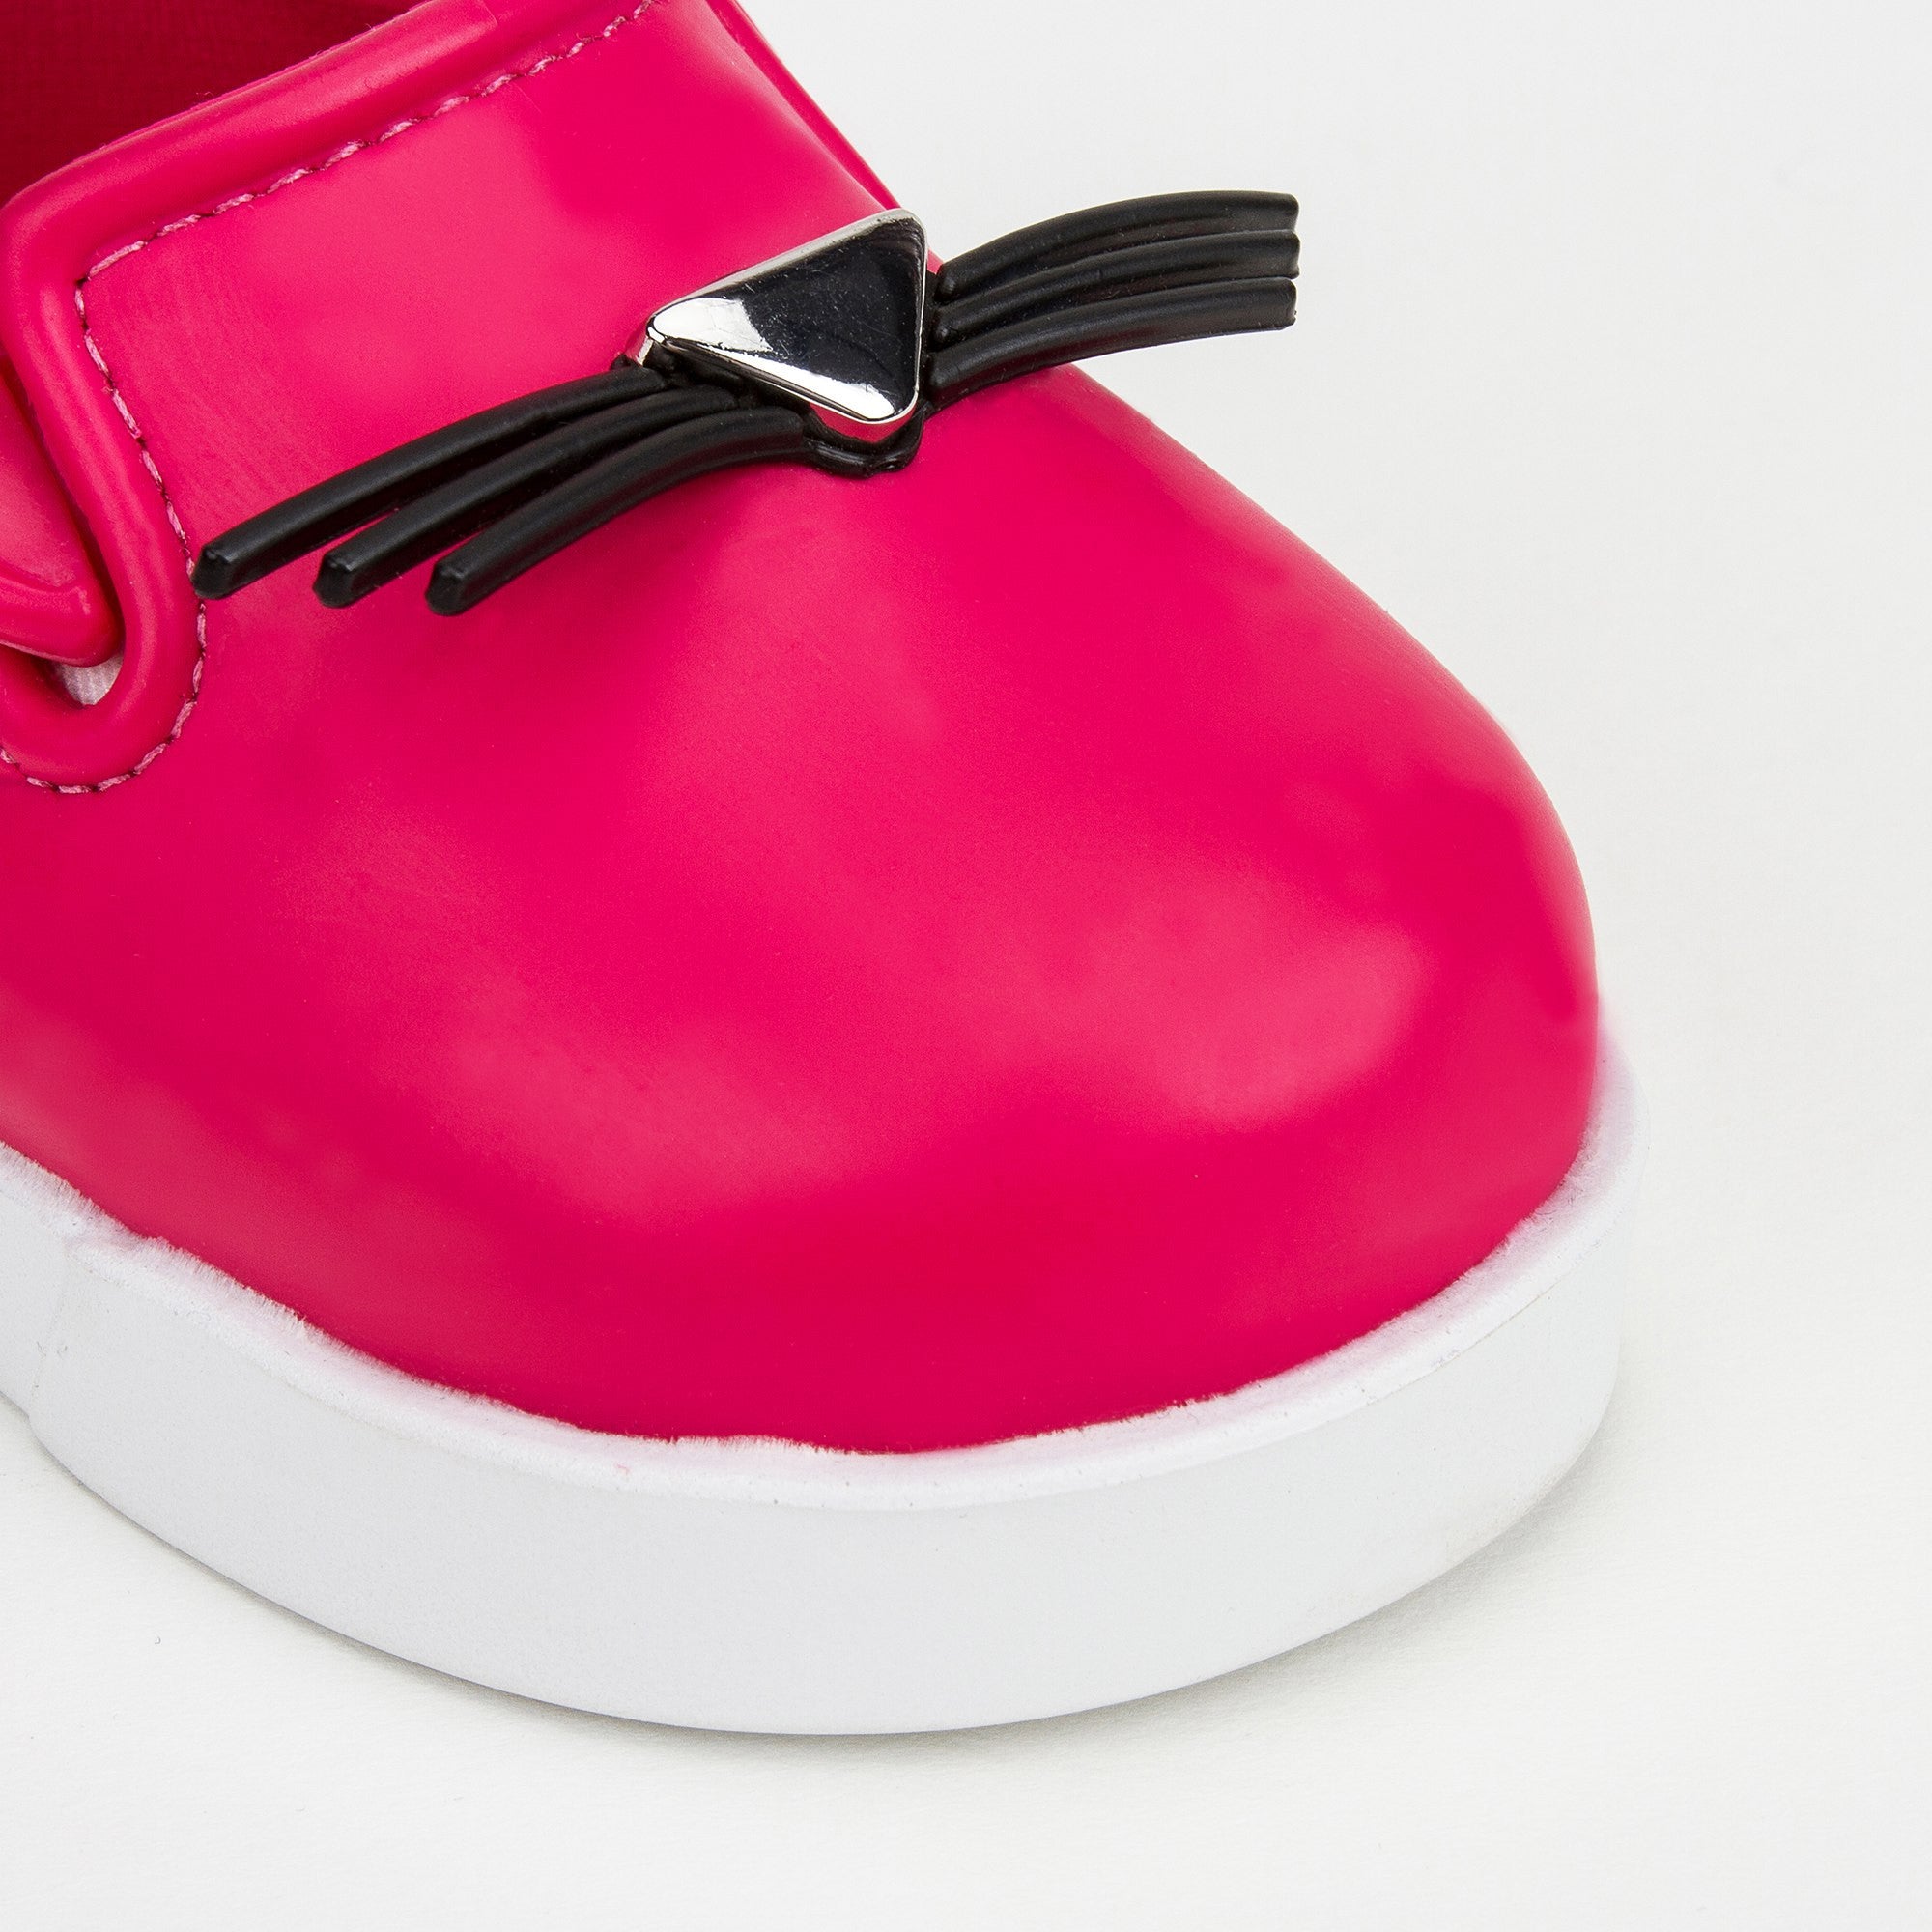 Girls Pink 'Cat' Slip-On Shoes